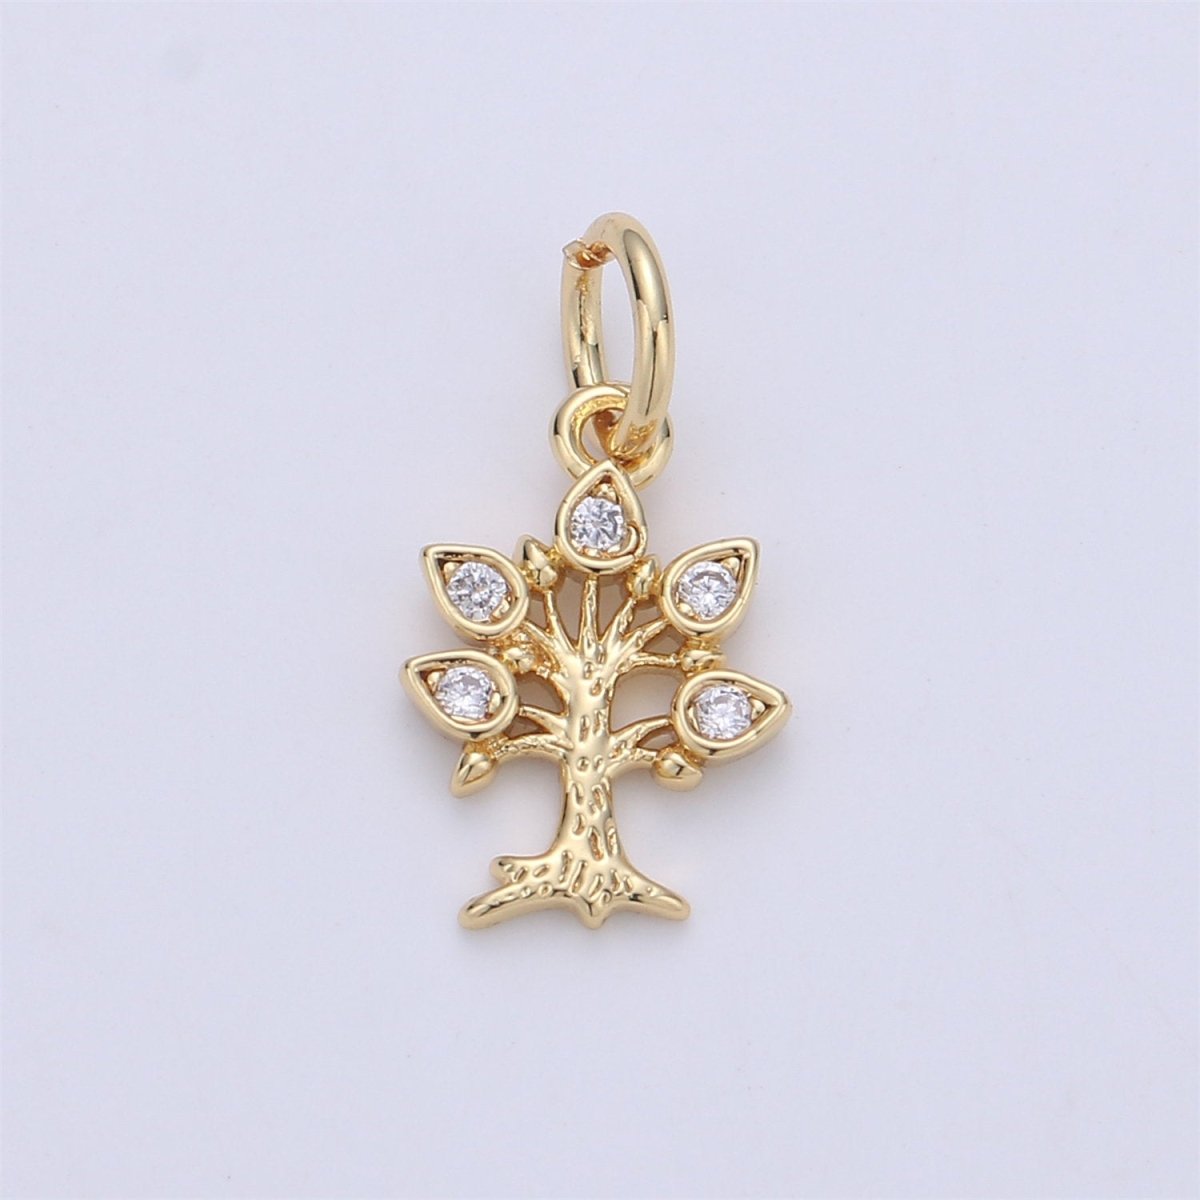 24K Gold filled Rustic Tree of Life Dainty Charm with Micro Pave charm Cubic Zirconia CZ Stone for Necklace or Bracelet, C-917 - DLUXCA